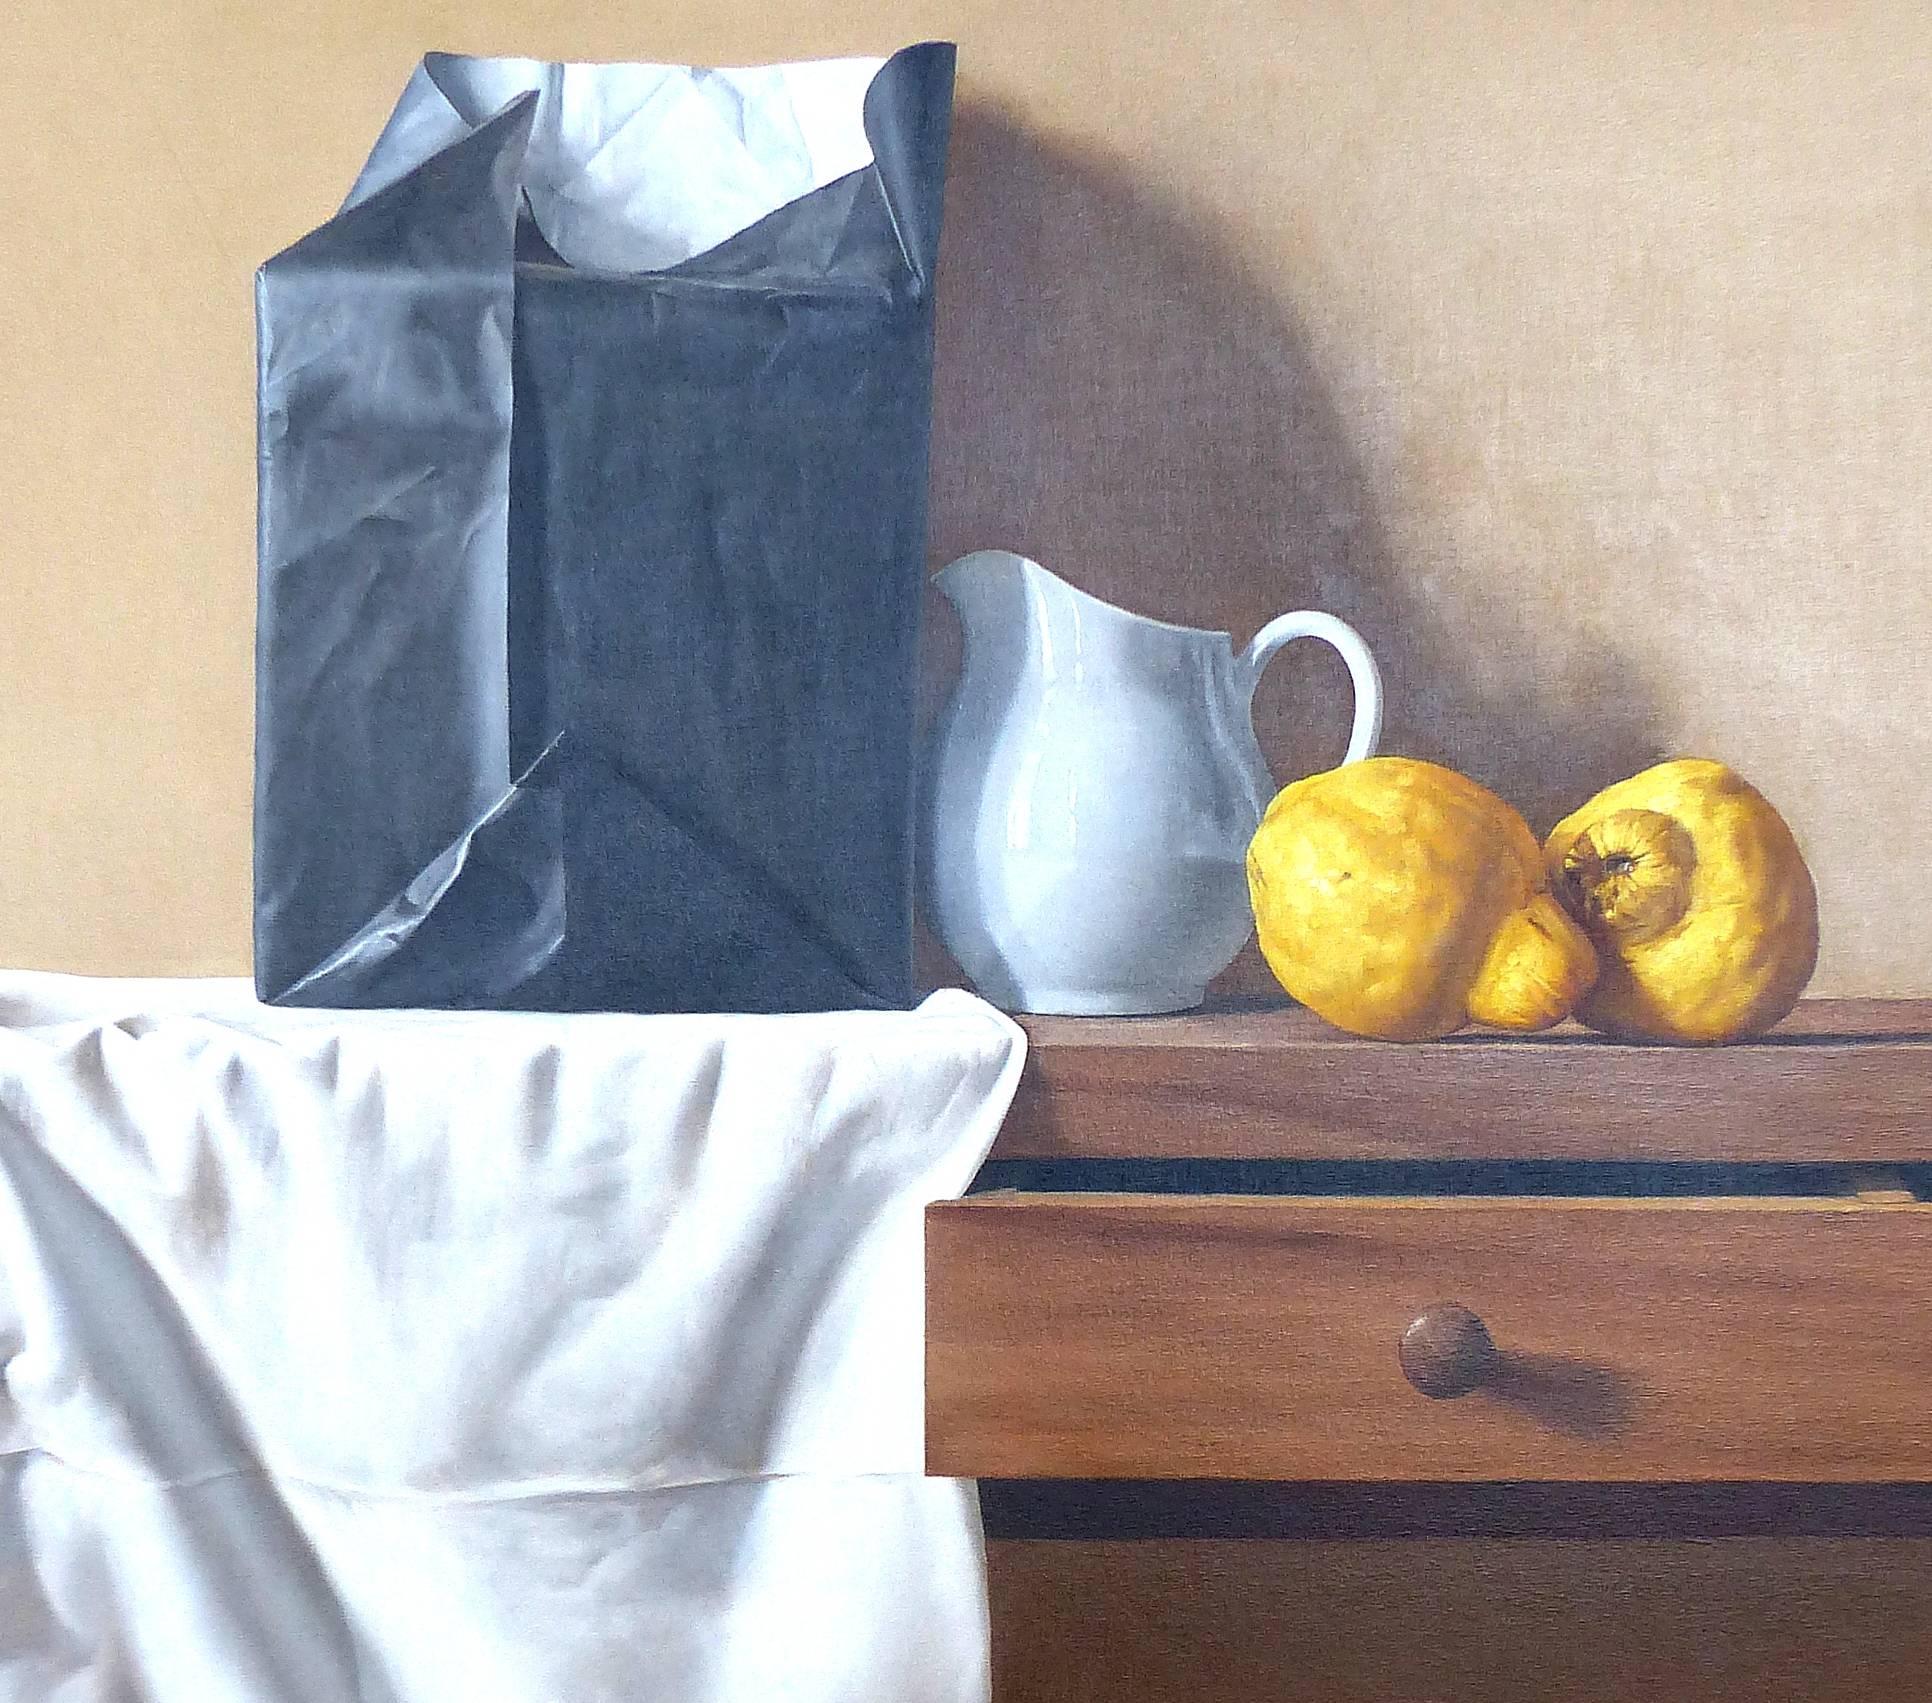 A well-executed oil on canvas by noted Argentine artist Fernando O'Connor signed lower right and on verso and dated '03. A still life depicting a table with draped white table cloth, black package with crinkled paper, and a pitcher and vegetables.